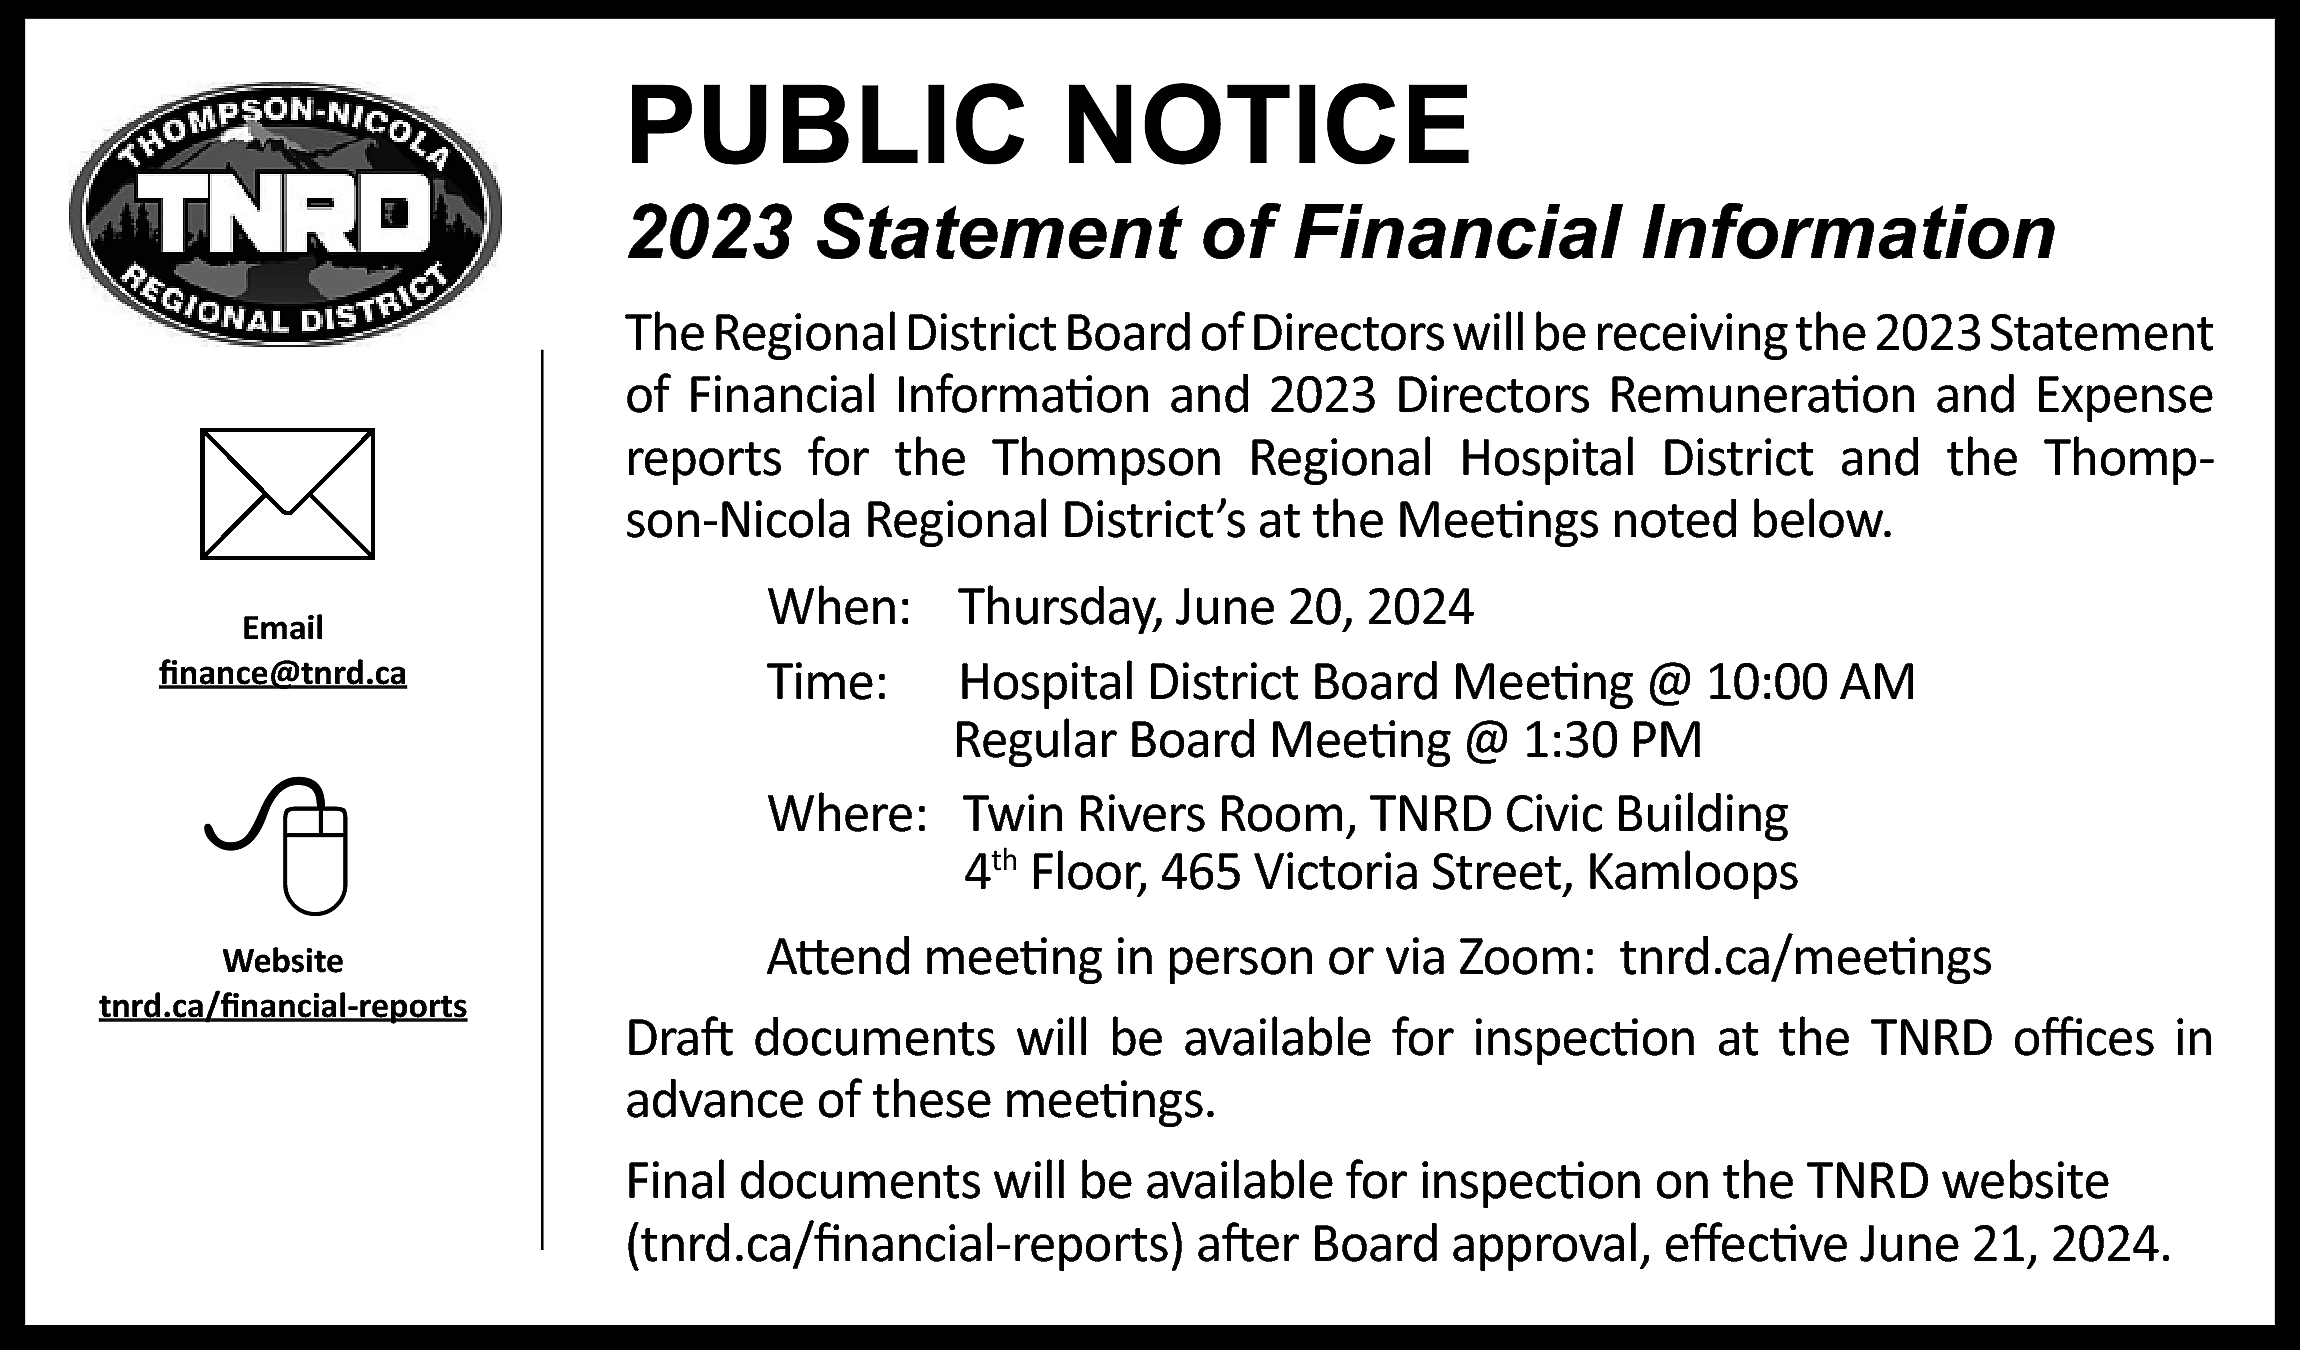 PUBLIC NOTICE <br> <br>2023 Statement  PUBLIC NOTICE    2023 Statement of Financial Information        Email  finance@tnrd.ca        Website  tnrd.ca/financial-reports    The Regional District Board of Directors will be receiving the 2023 Statement  of Financial Information and 2023 Directors Remuneration and Expense  reports for the Thompson Regional Hospital District and the Thompson-Nicola Regional District’s at the Meetings noted below.  When: Thursday, June 20, 2024  Time: Hospital District Board Meeting @ 10:00 AM  Regular Board Meeting @ 1:30 PM  Where: Twin Rivers Room, TNRD Civic Building  4th Floor, 465 Victoria Street, Kamloops  Attend meeting in person or via Zoom: tnrd.ca/meetings  Draft documents will be available for inspection at the TNRD offices in  advance of these meetings.  Final documents will be available for inspection on the TNRD website  (tnrd.ca/financial-reports) after Board approval, effective June 21, 2024.    